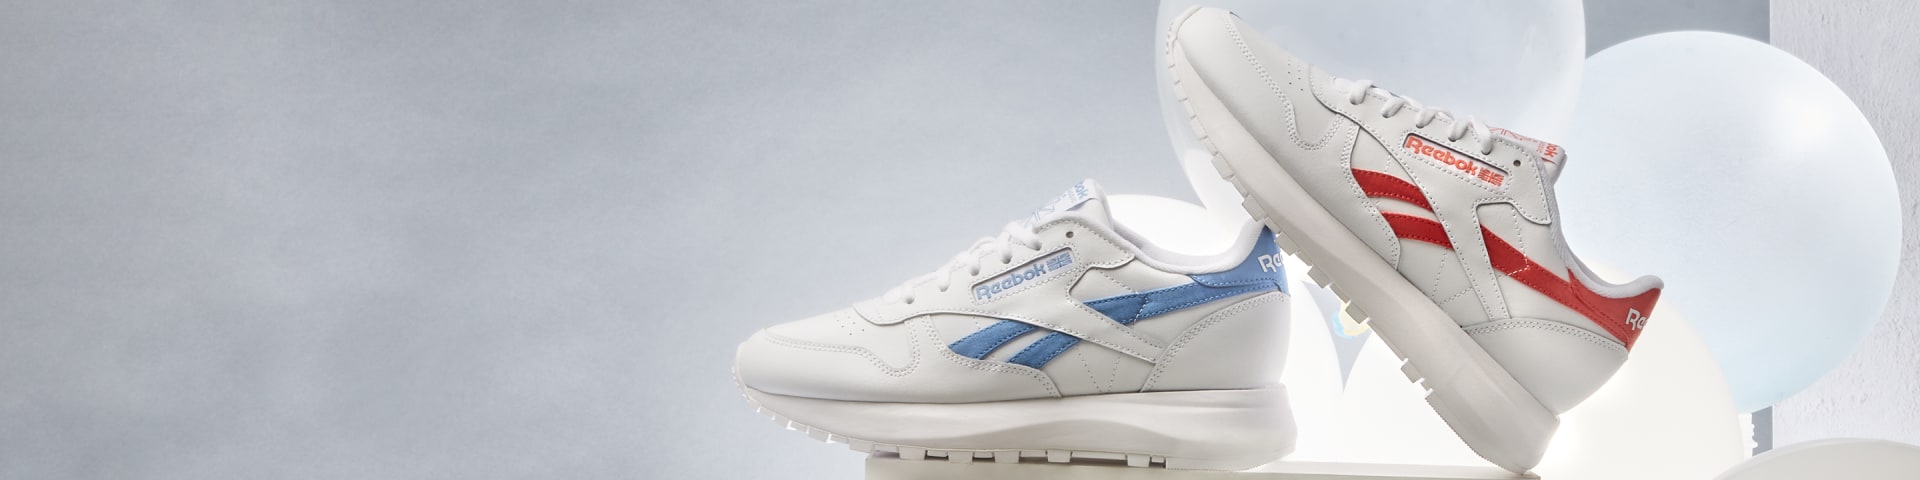 Women's Classic Leather Shoes | Reebok US